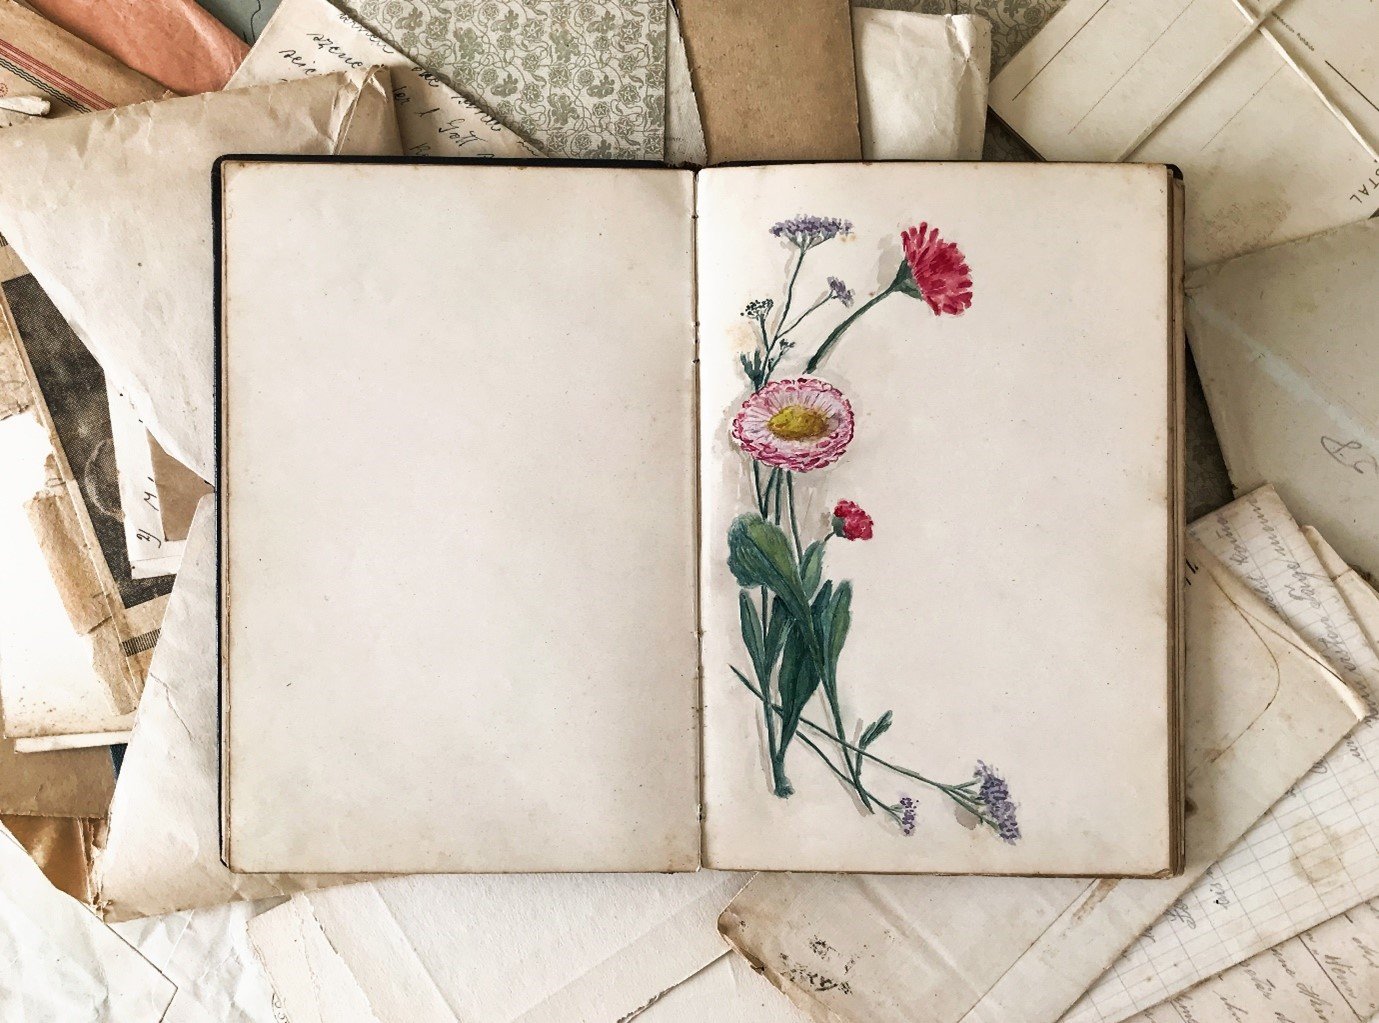 blank journal with flowers on page lying on old photos and papers